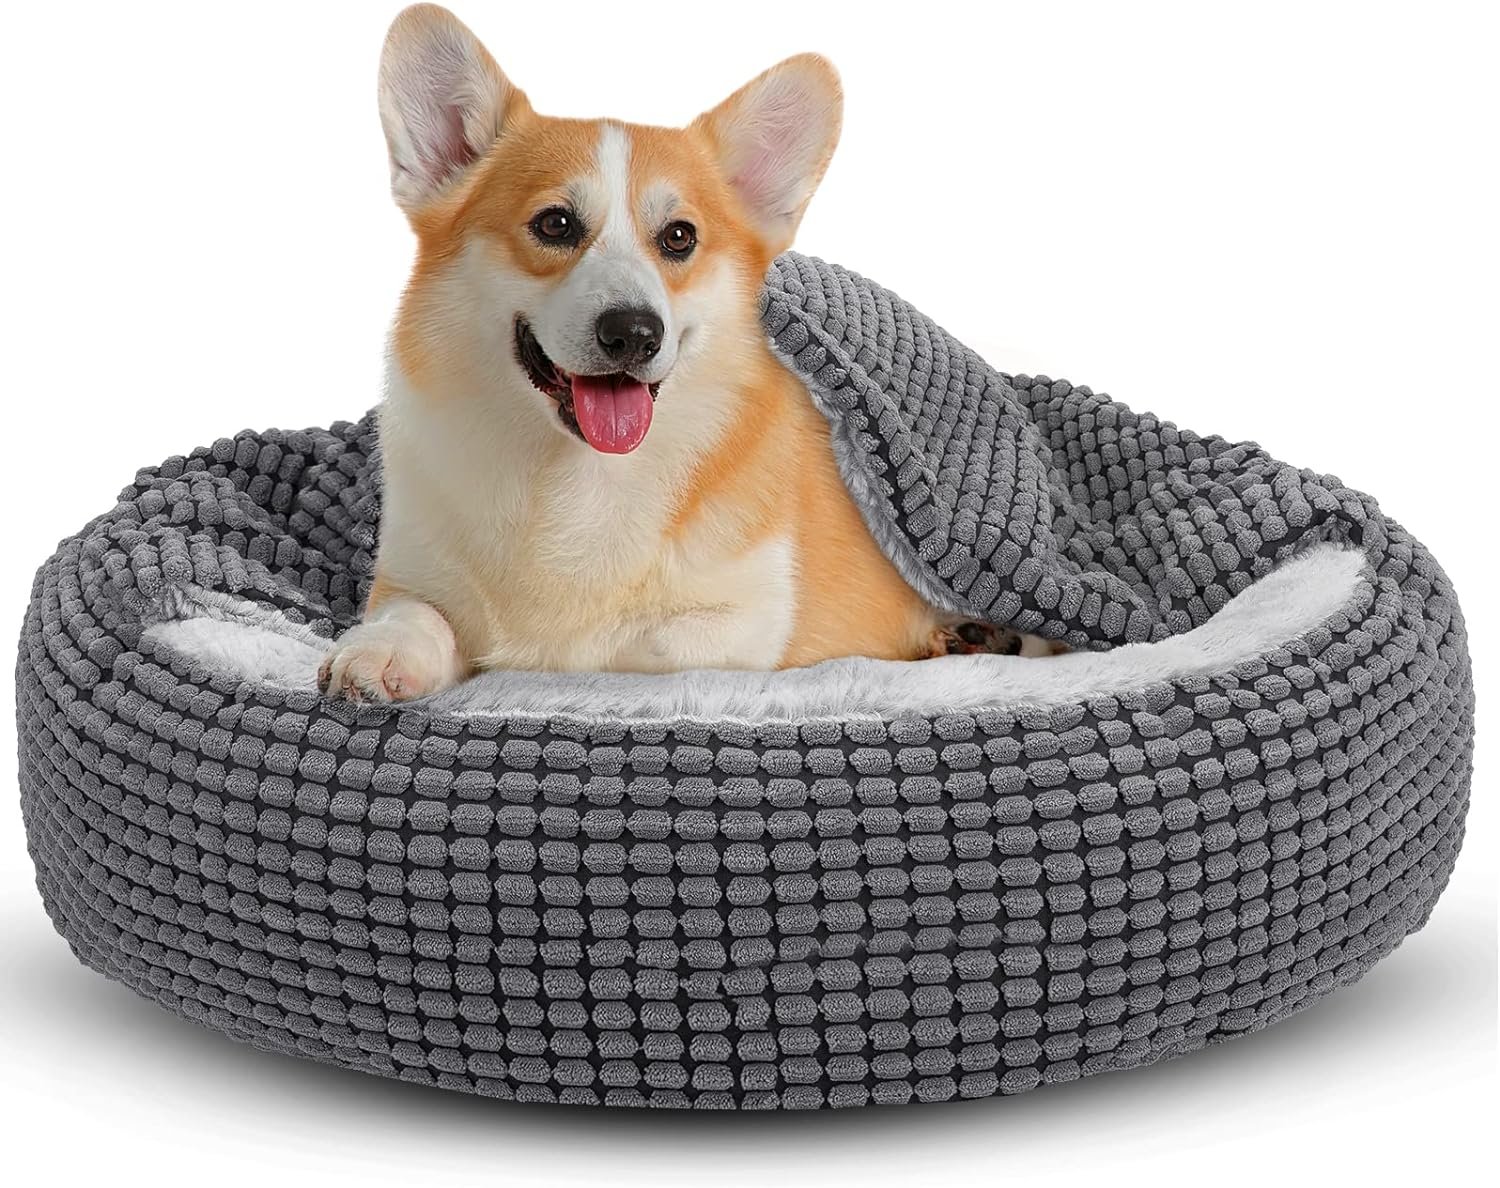 joejoy round dog bed calming donut cuddler pet bed for large medium small dogs warm puppy hooded dog cave bed cat bed me